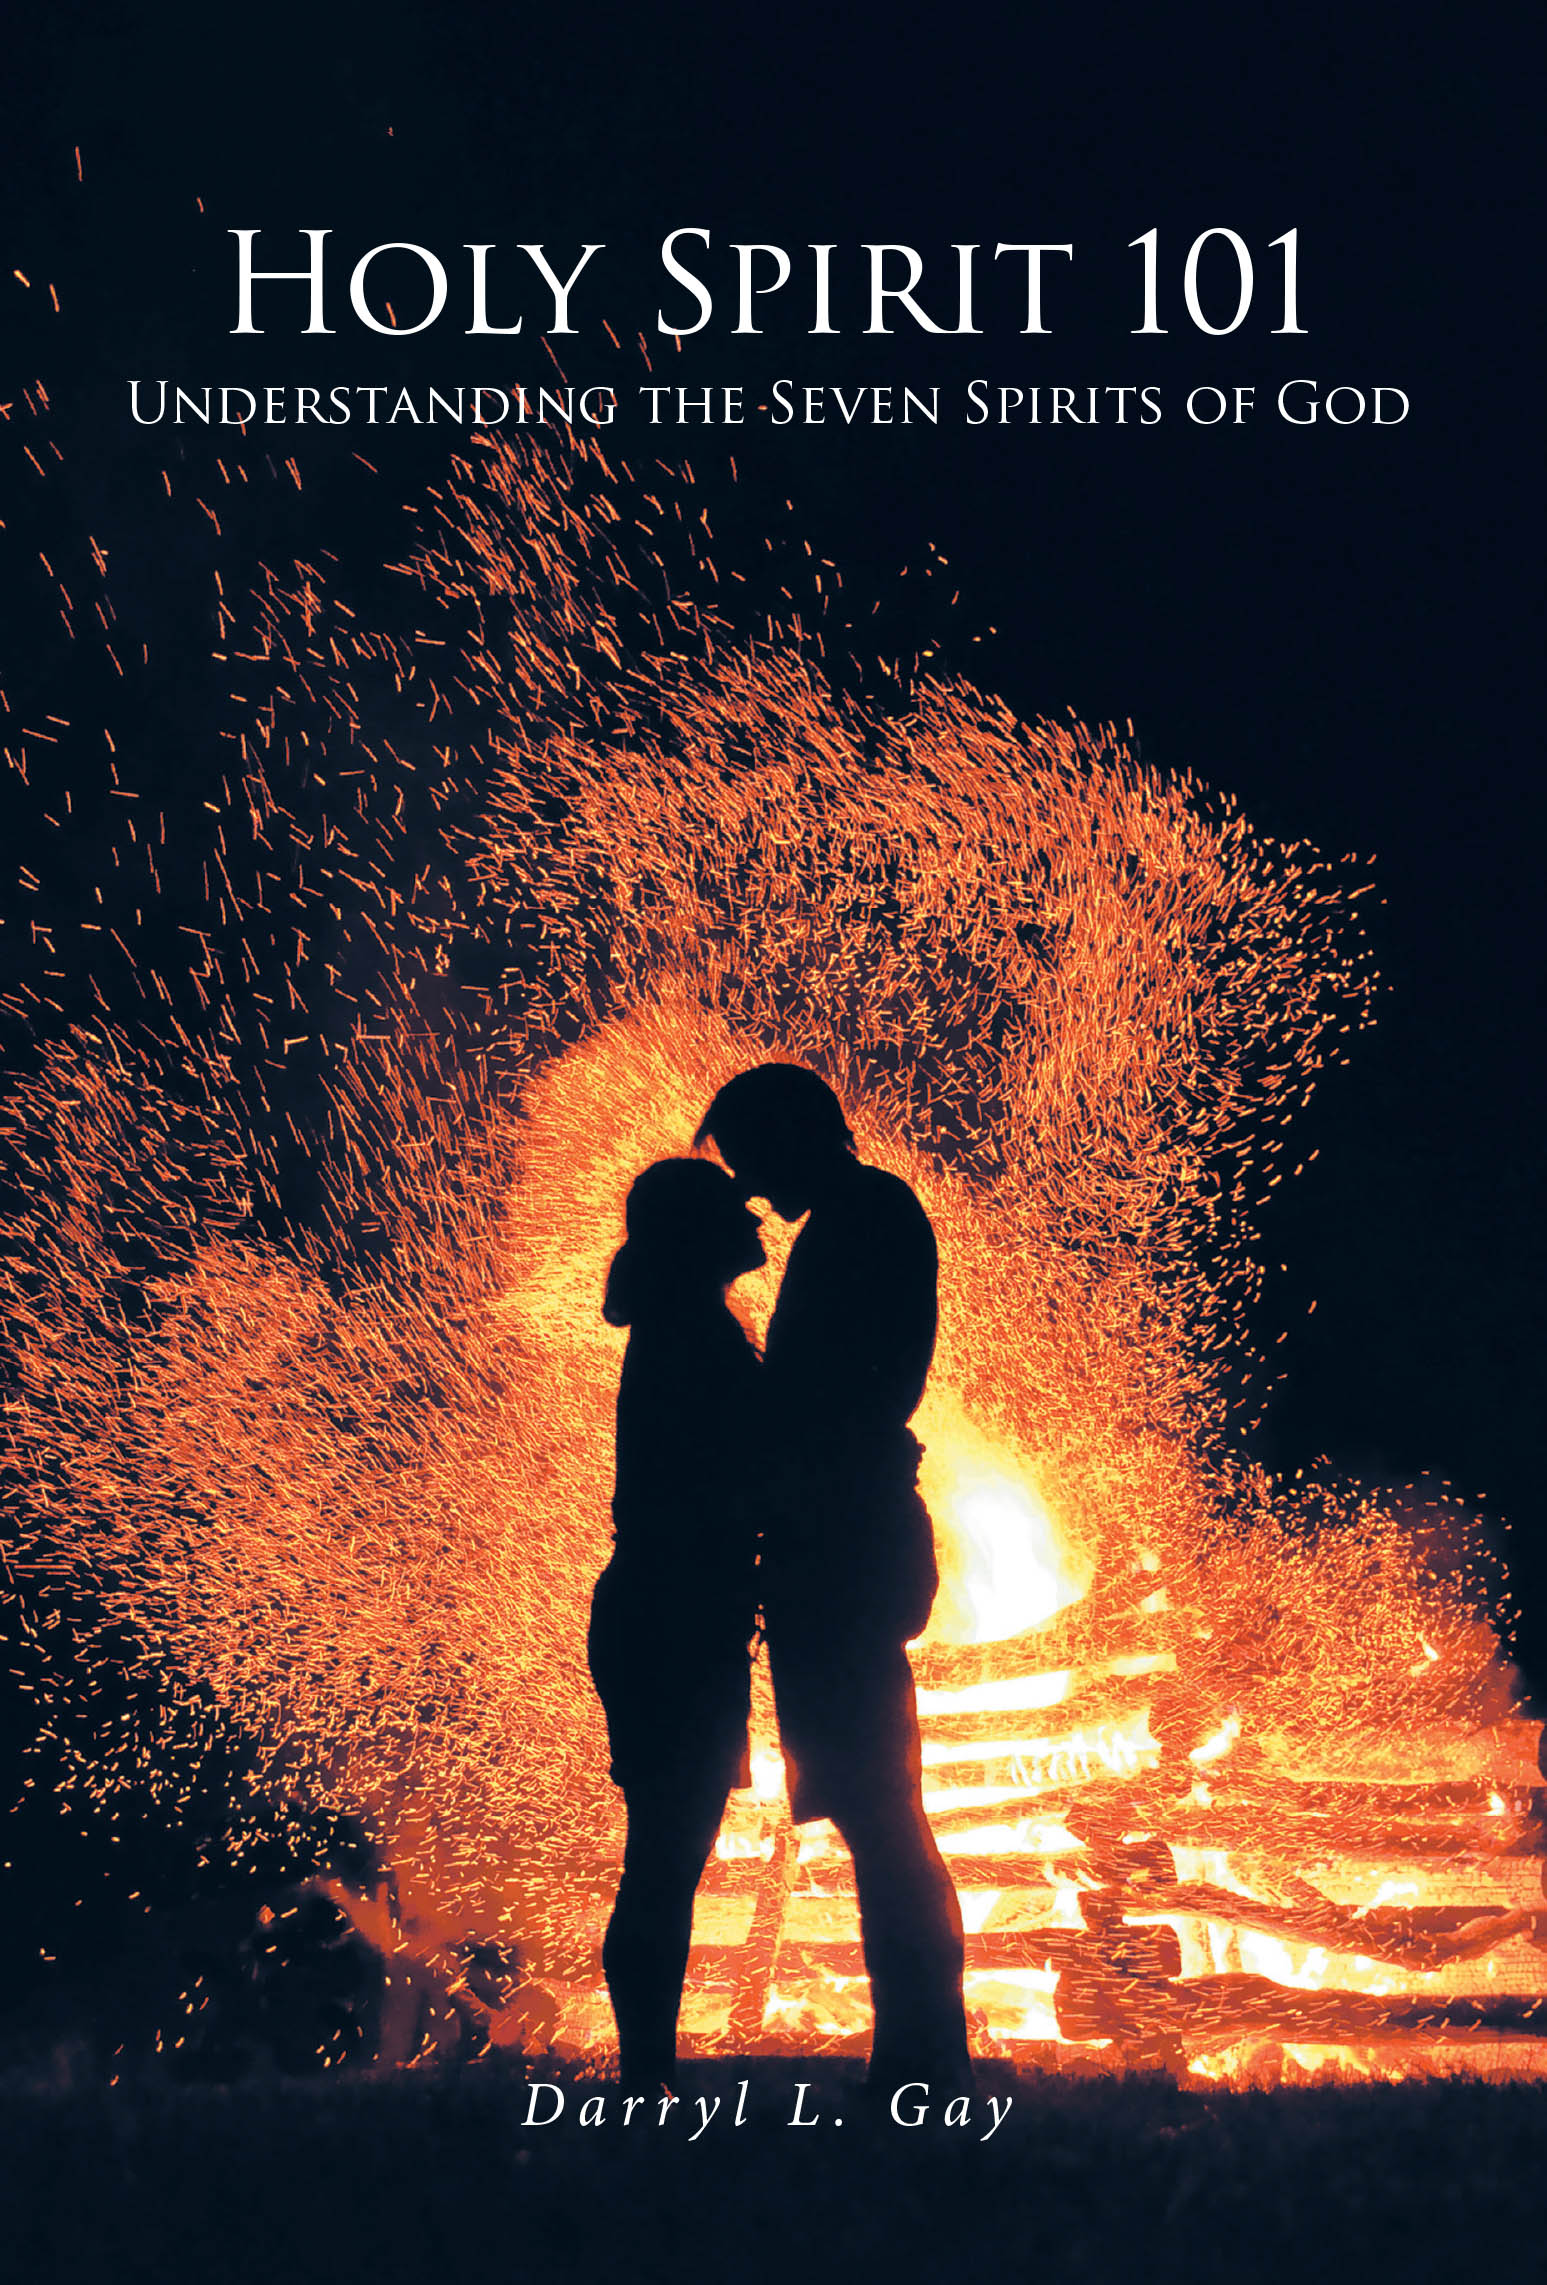 Darryl L. Gay’s Newly Released "Holy Spirit 101: Understanding the Seven Spirits of God" is an Enlightening Exploration of Divine Attributes